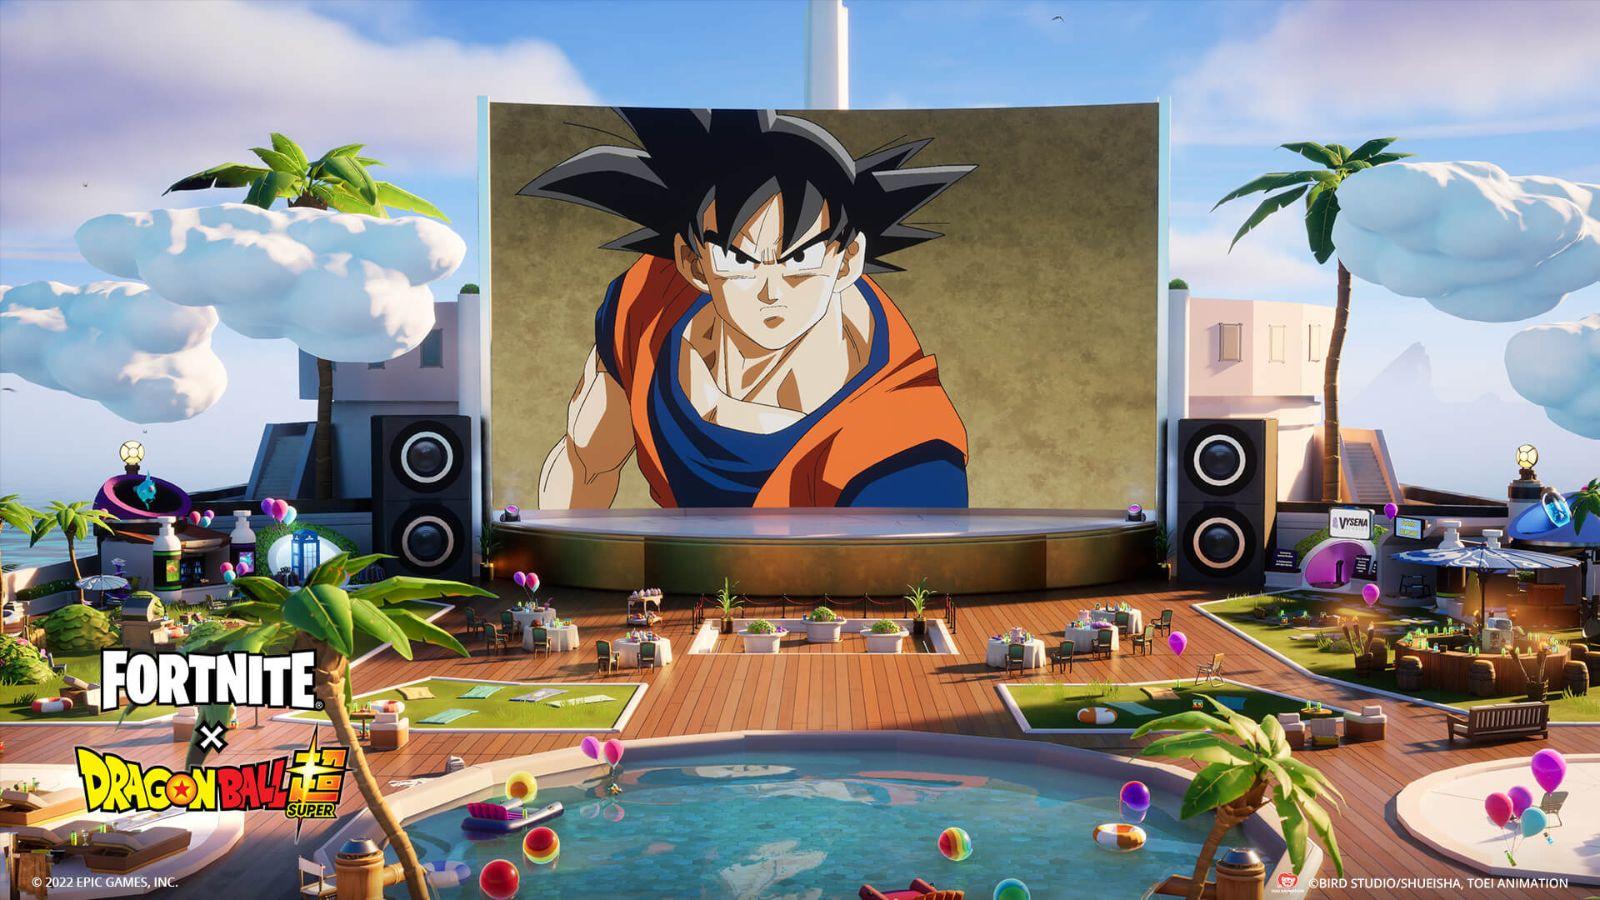 Fortnite Dragon Ball Super episode playing on screen